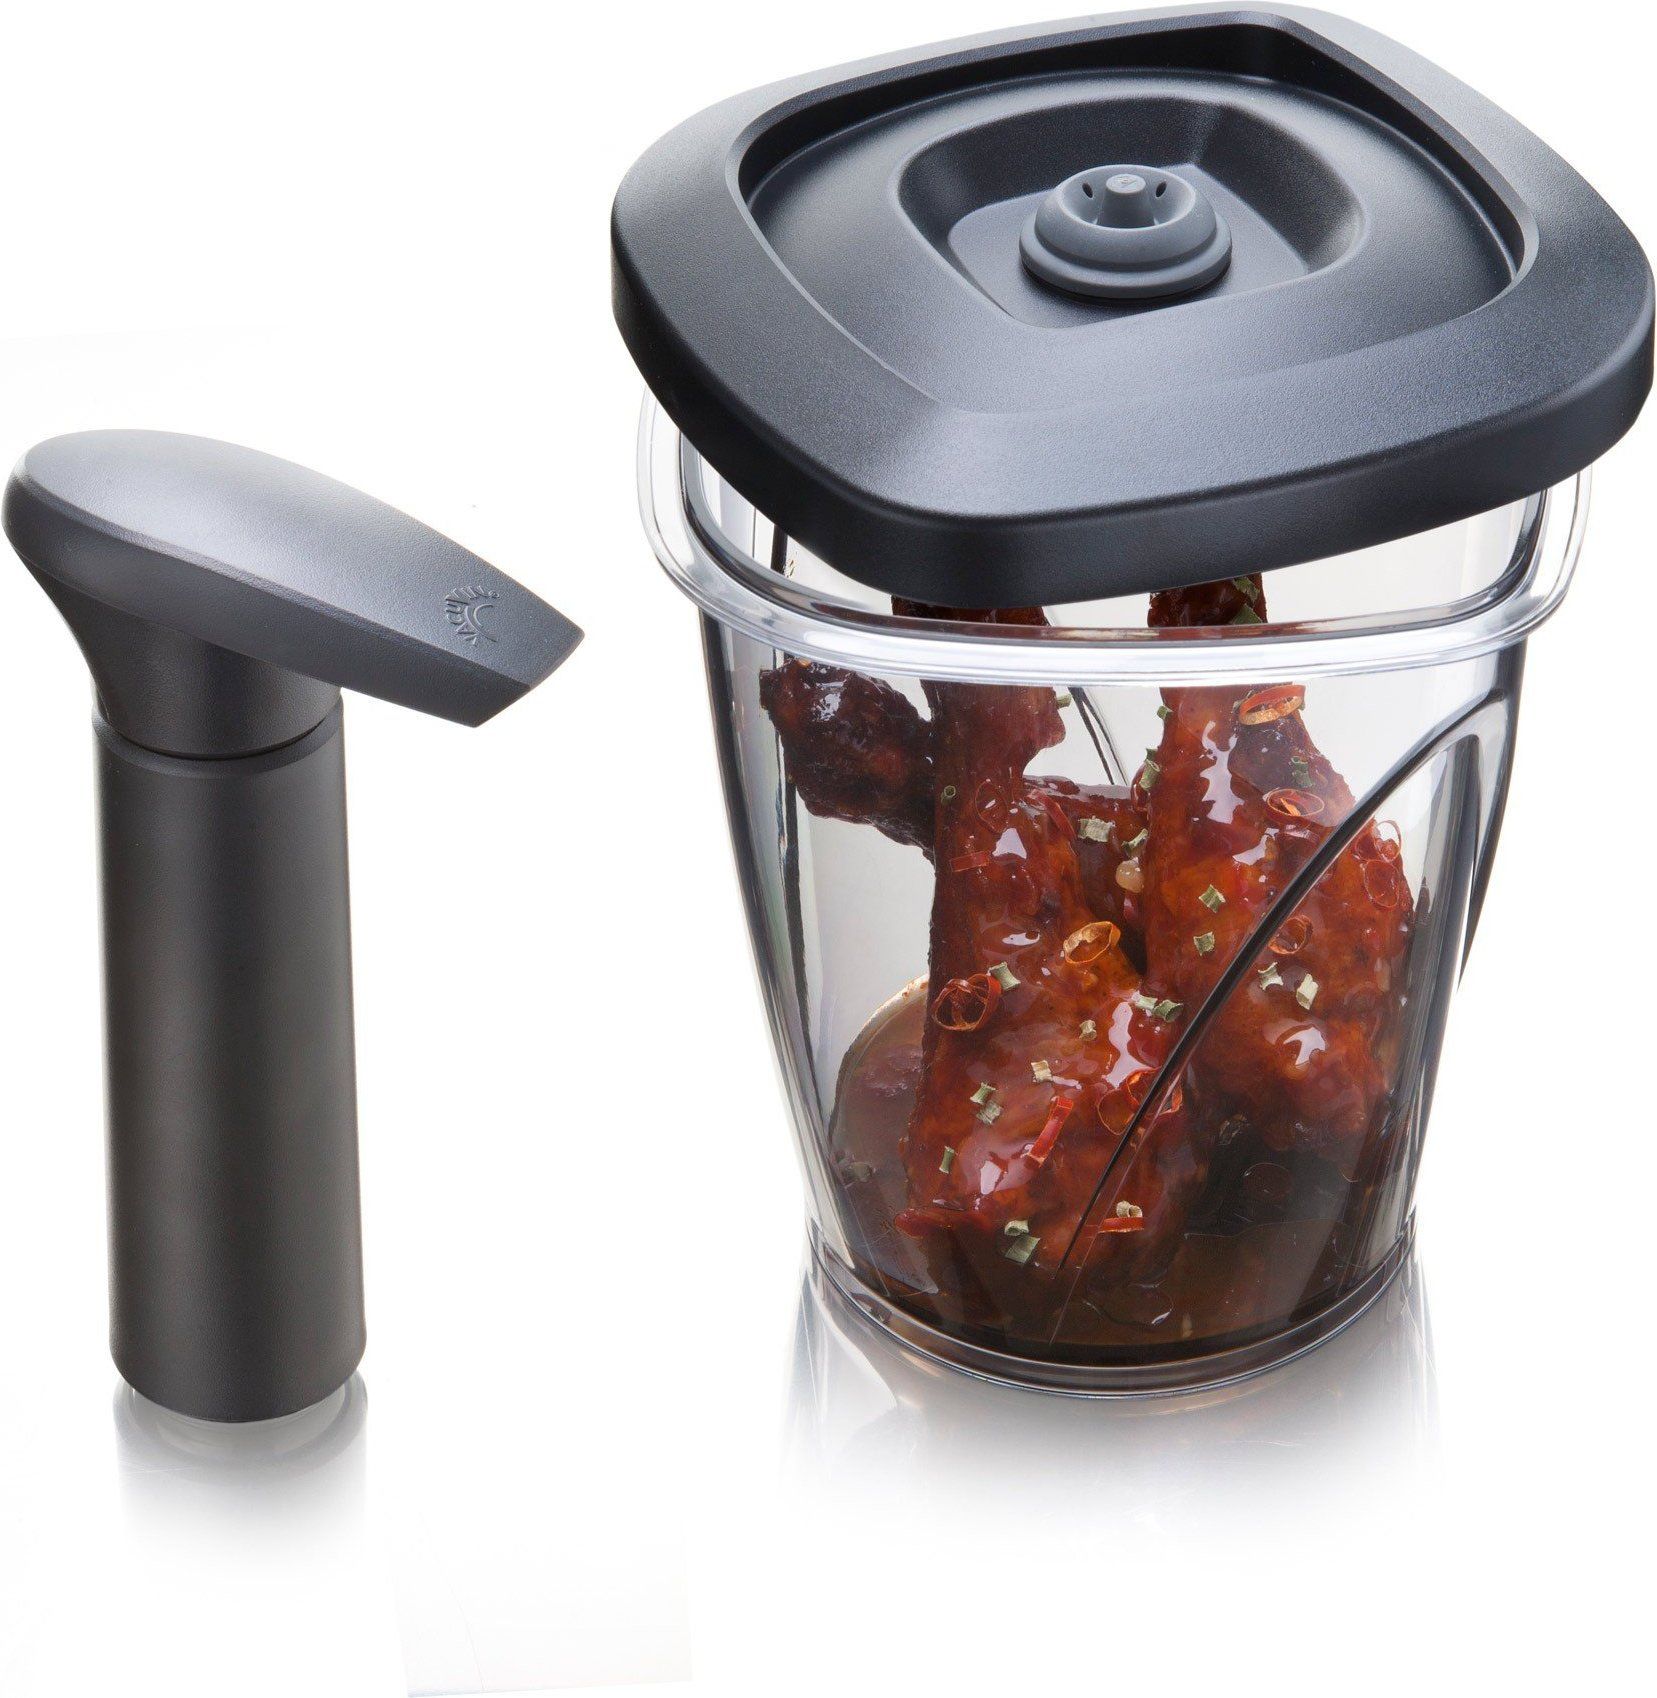 https://3fa-media.com/tomorrows_kitchen/tomorrows-kitchen-instant-marinater-vacuum-container-for-marinating__2976460-b-s2500x2500.jpg